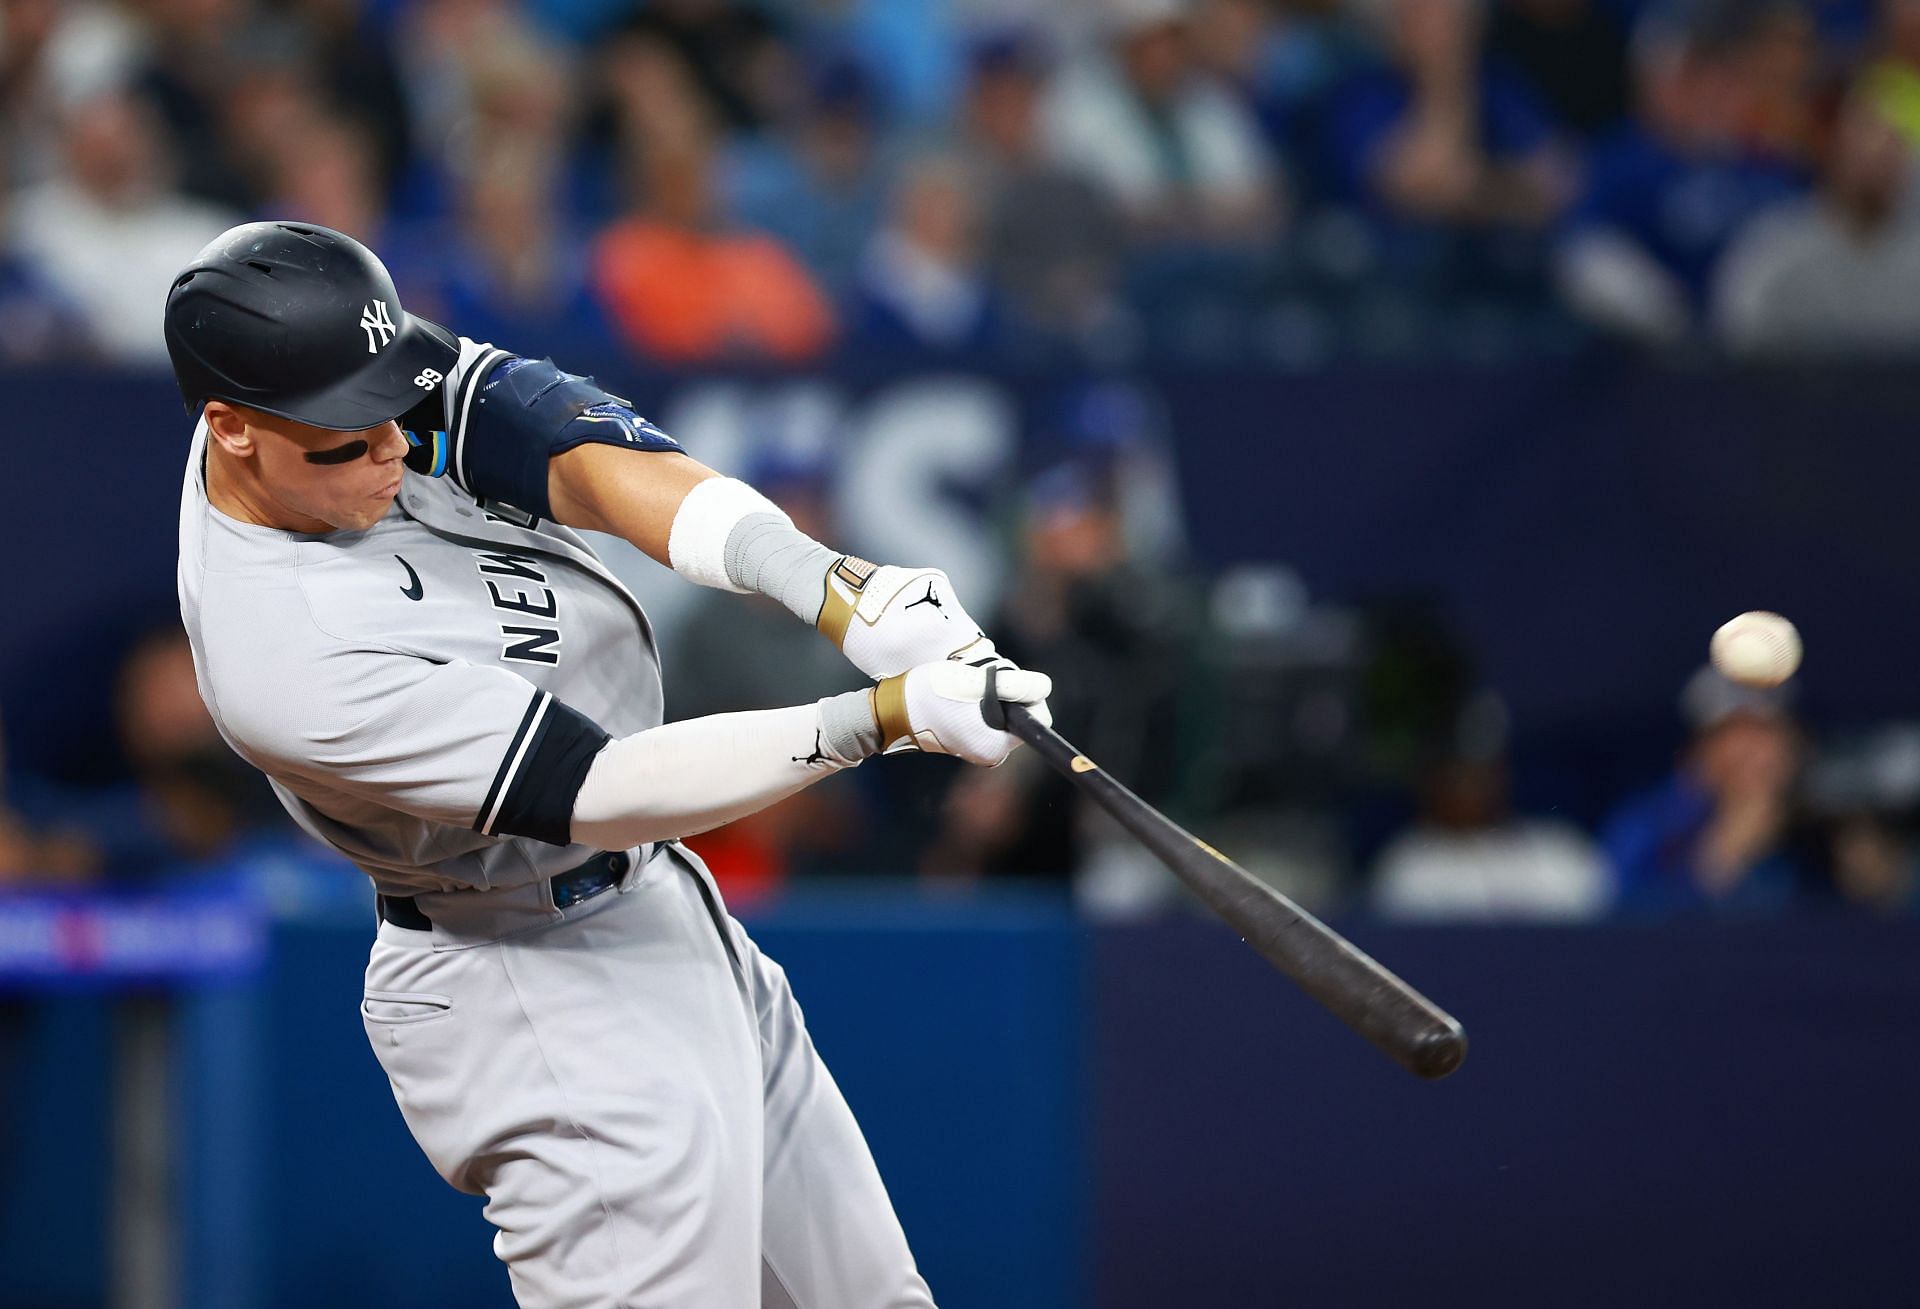 Aaron Judge of the New York Yankees hits a home run against the Toronto Blue Jays at Rogers Centre